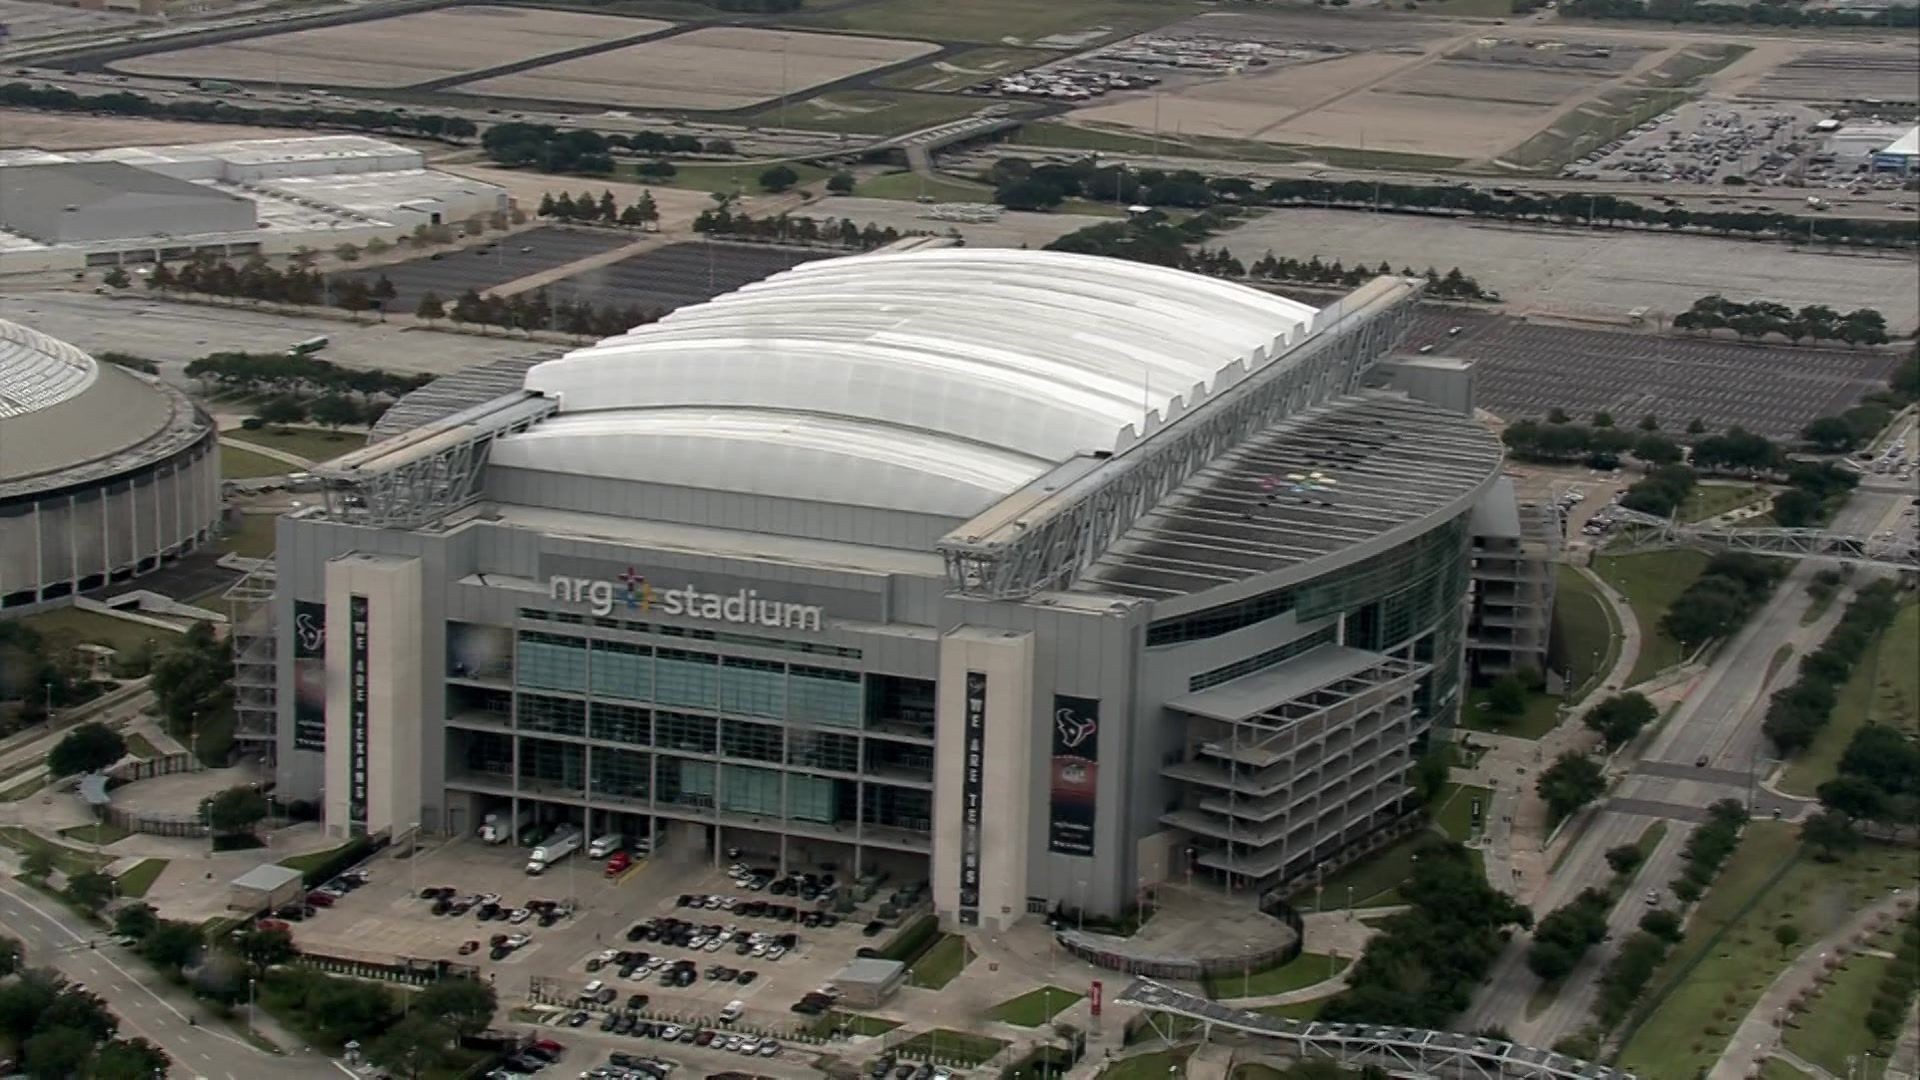 KPRC 2 Investigates: NRG's roof that rarely opens